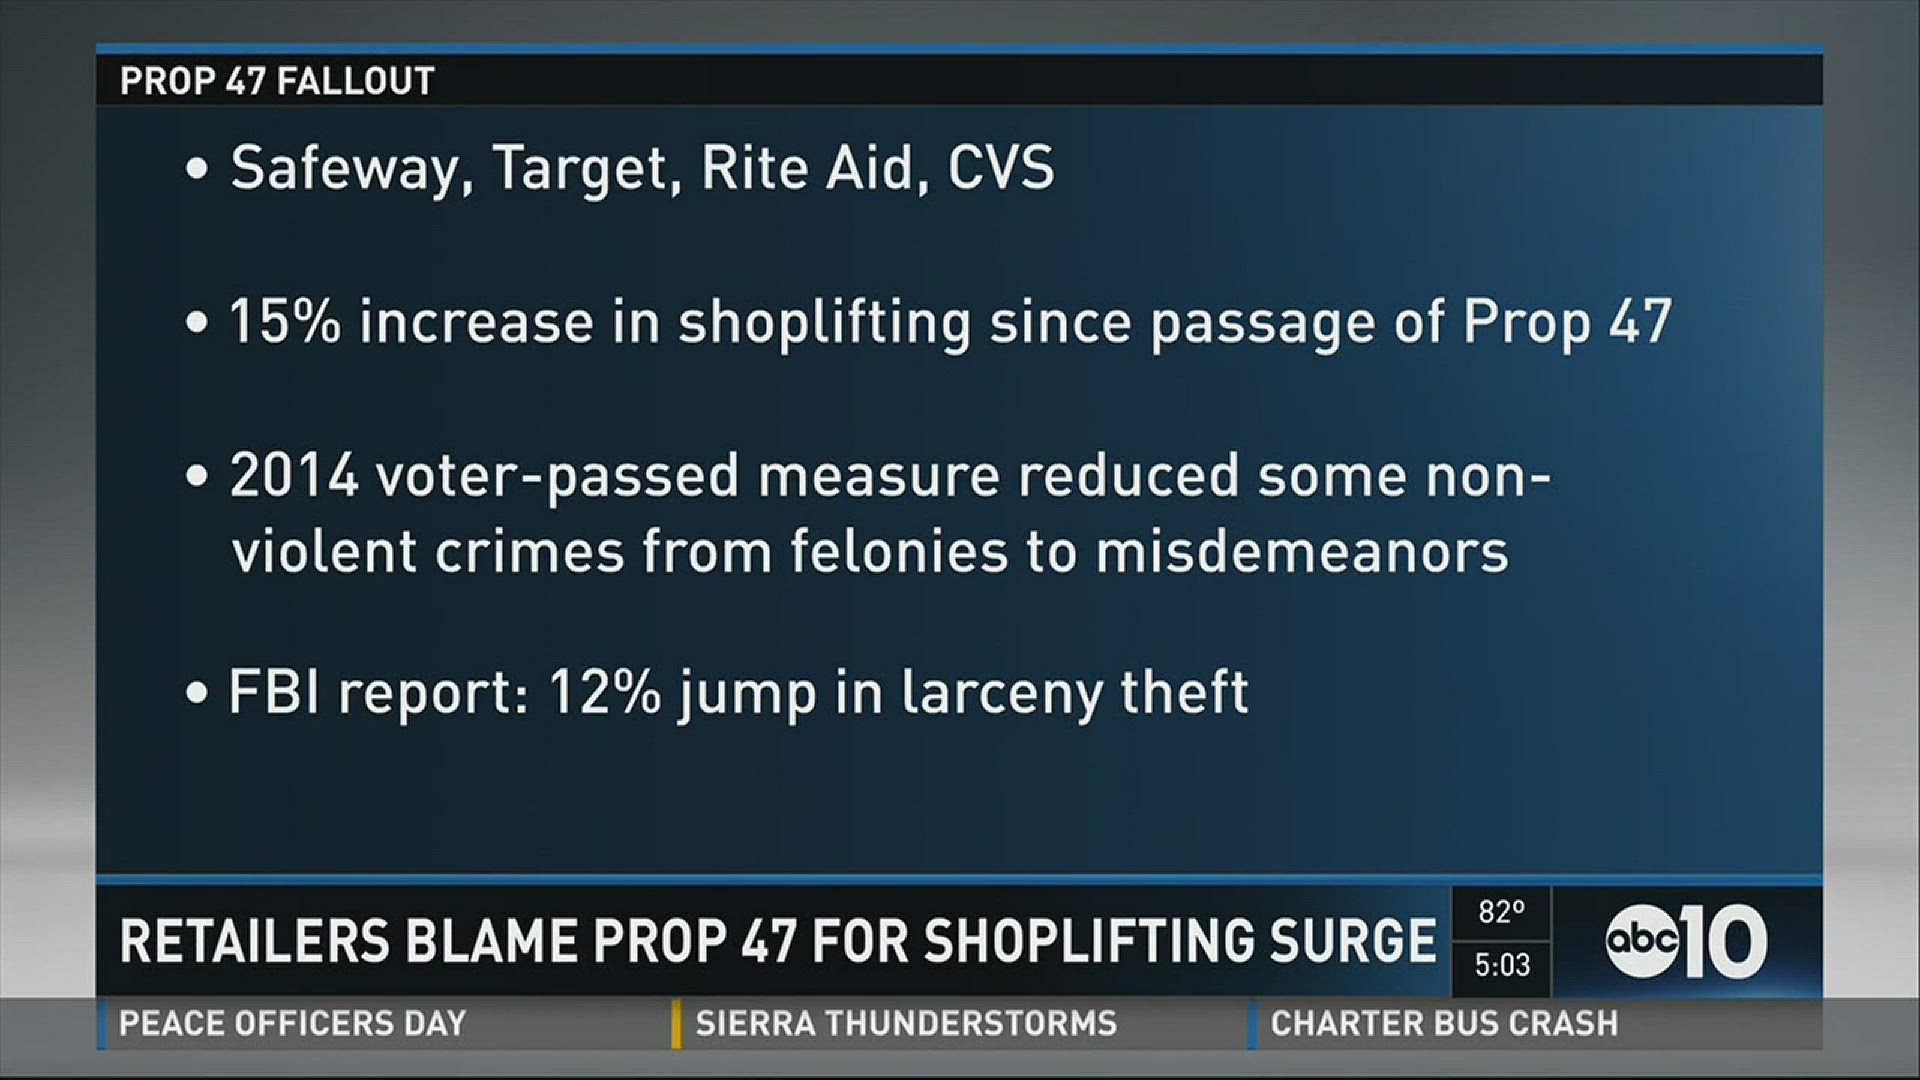 A few large retailers across the state -- including Safeway, Target, Rite Aid and CVS -- are blaming minor crime penalty reducing Prop. 47 for a 15% surge in shoplifting (5/15/2016)